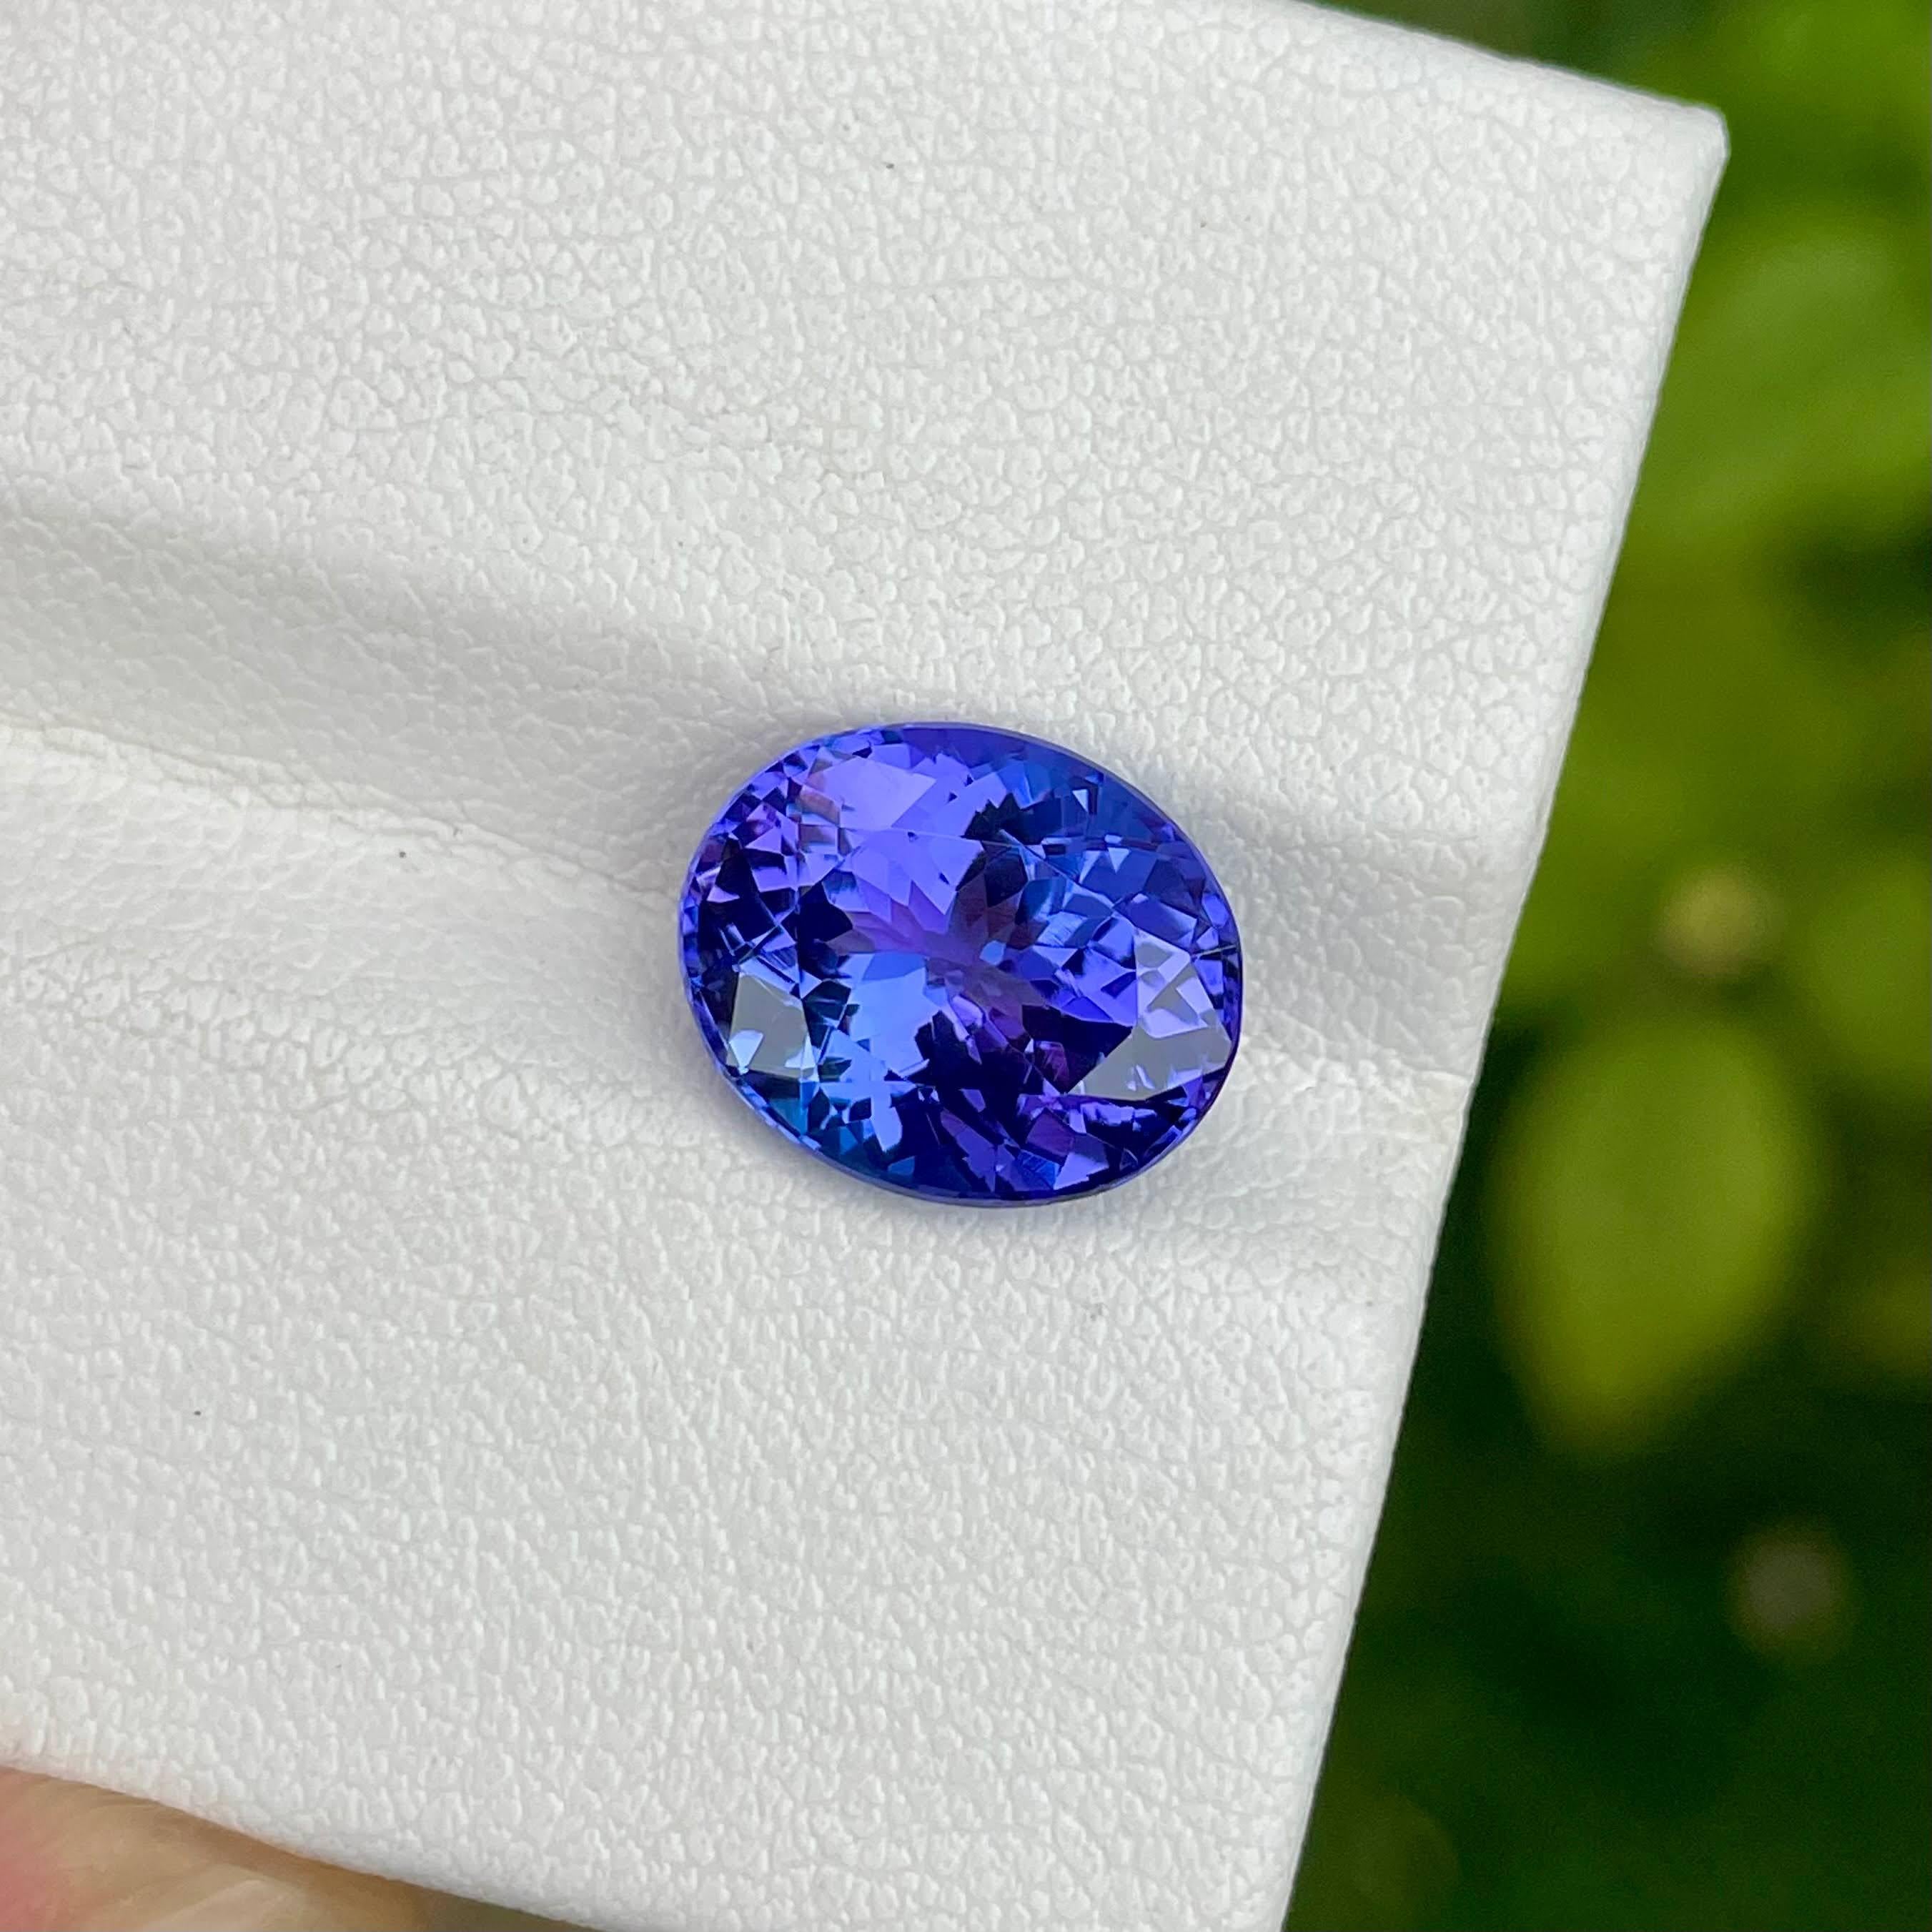 Weight 4.70 carats 
Dimensions 11.5x9.6x6.4 mm
Treatment Heated 
Origin Tanzania 
Clarity loupe clean 
Shape oval
Cut fancy oval 




This exquisite 4.70 carats AAA+ Grade Tanzanite Stone boasts unparalleled beauty with its radiant allure. Cut into